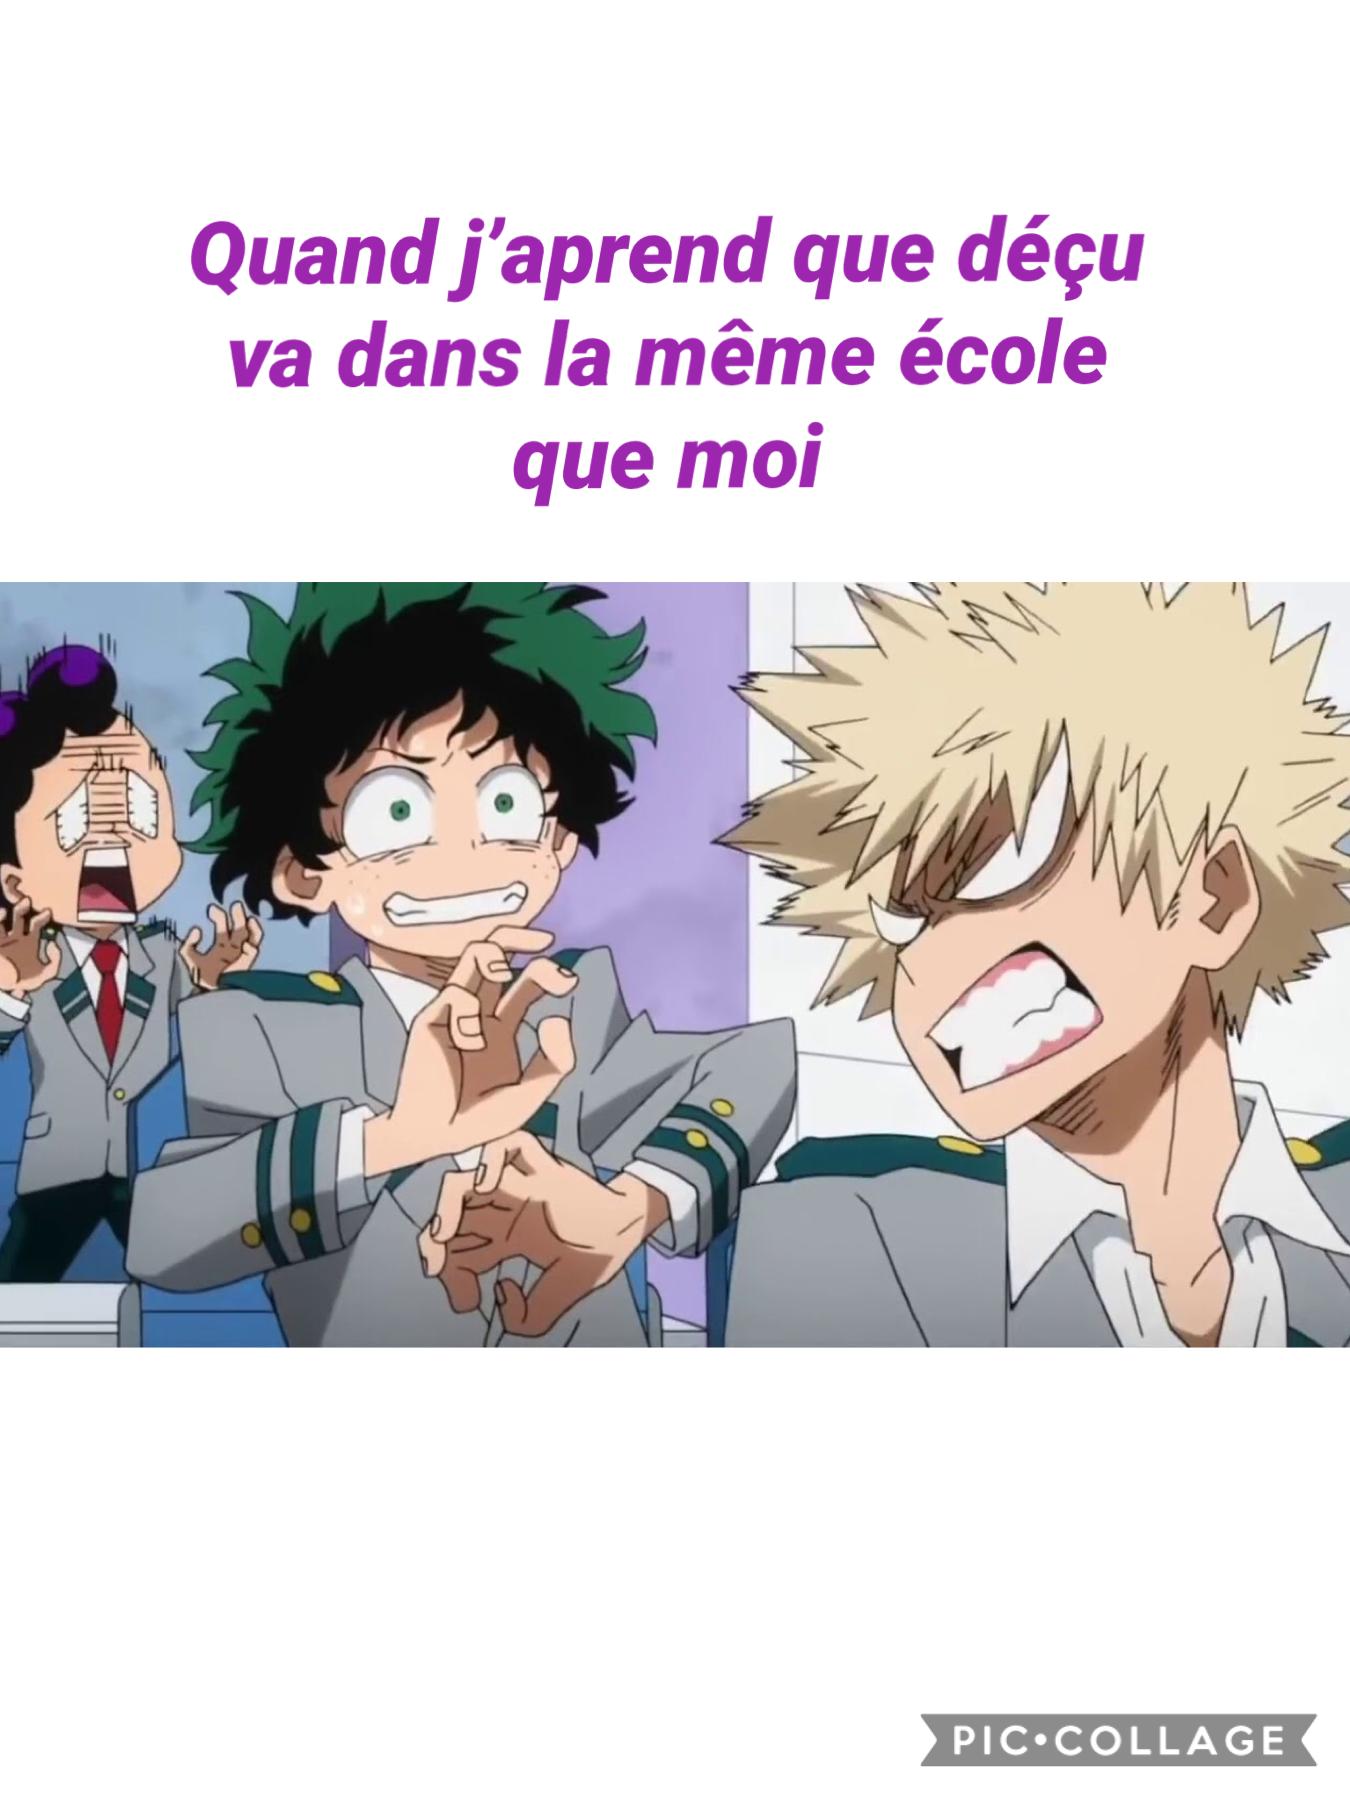 Collage by Bakugo_